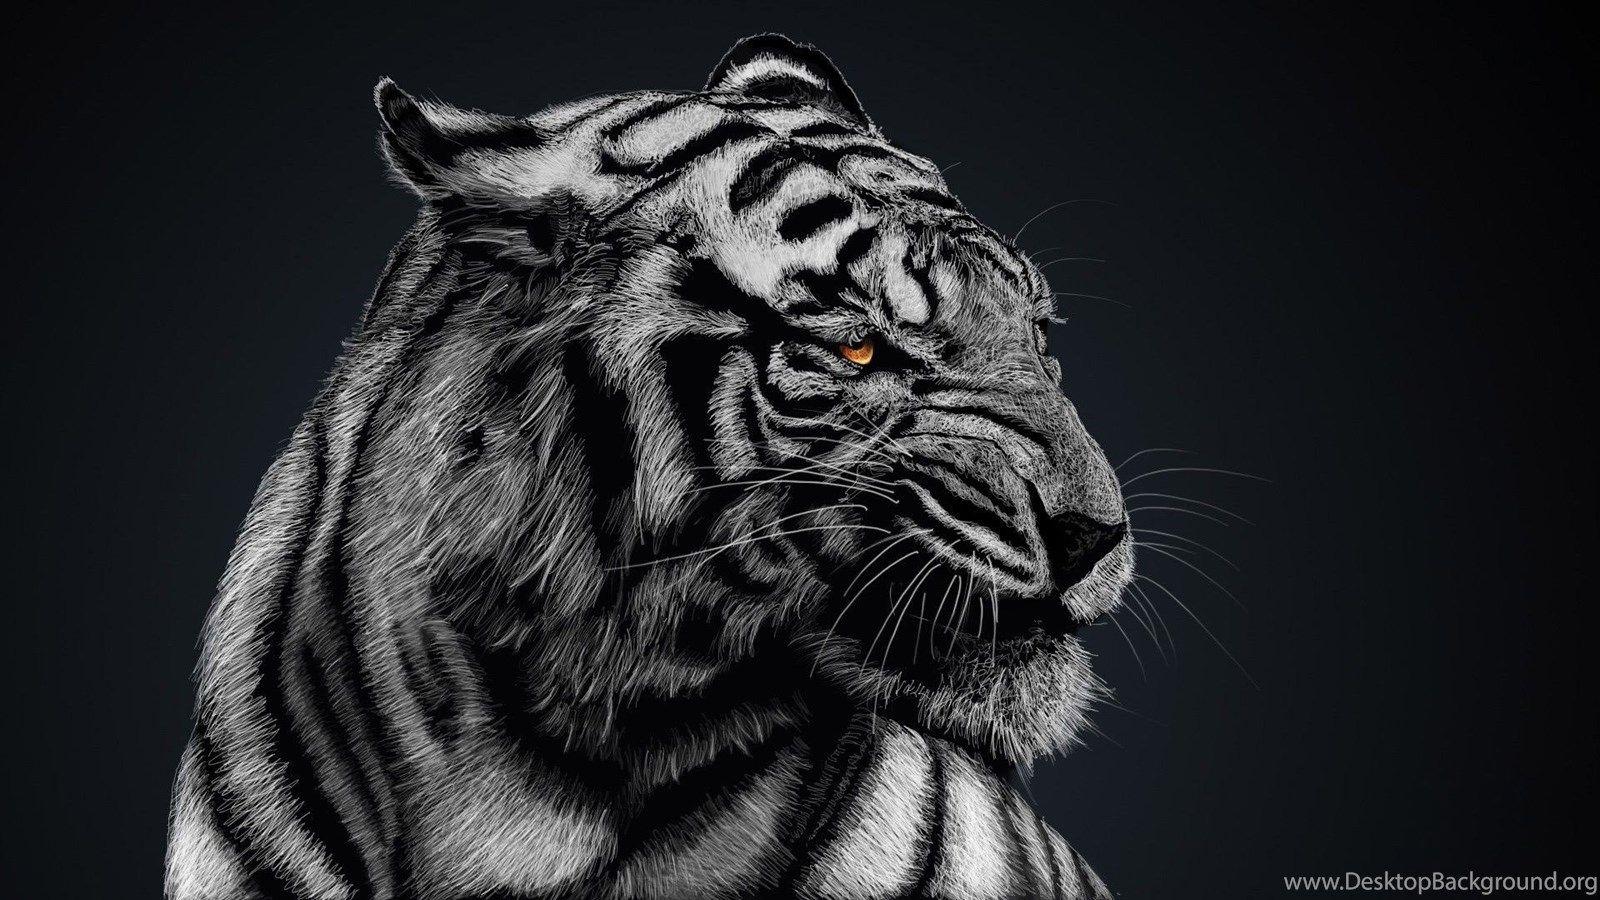 Wallpaper ID: 859247 / 1080P, awesome, tiger, 3d and abstract, deadly,  dark, danger, stunning, animal Wallpaper